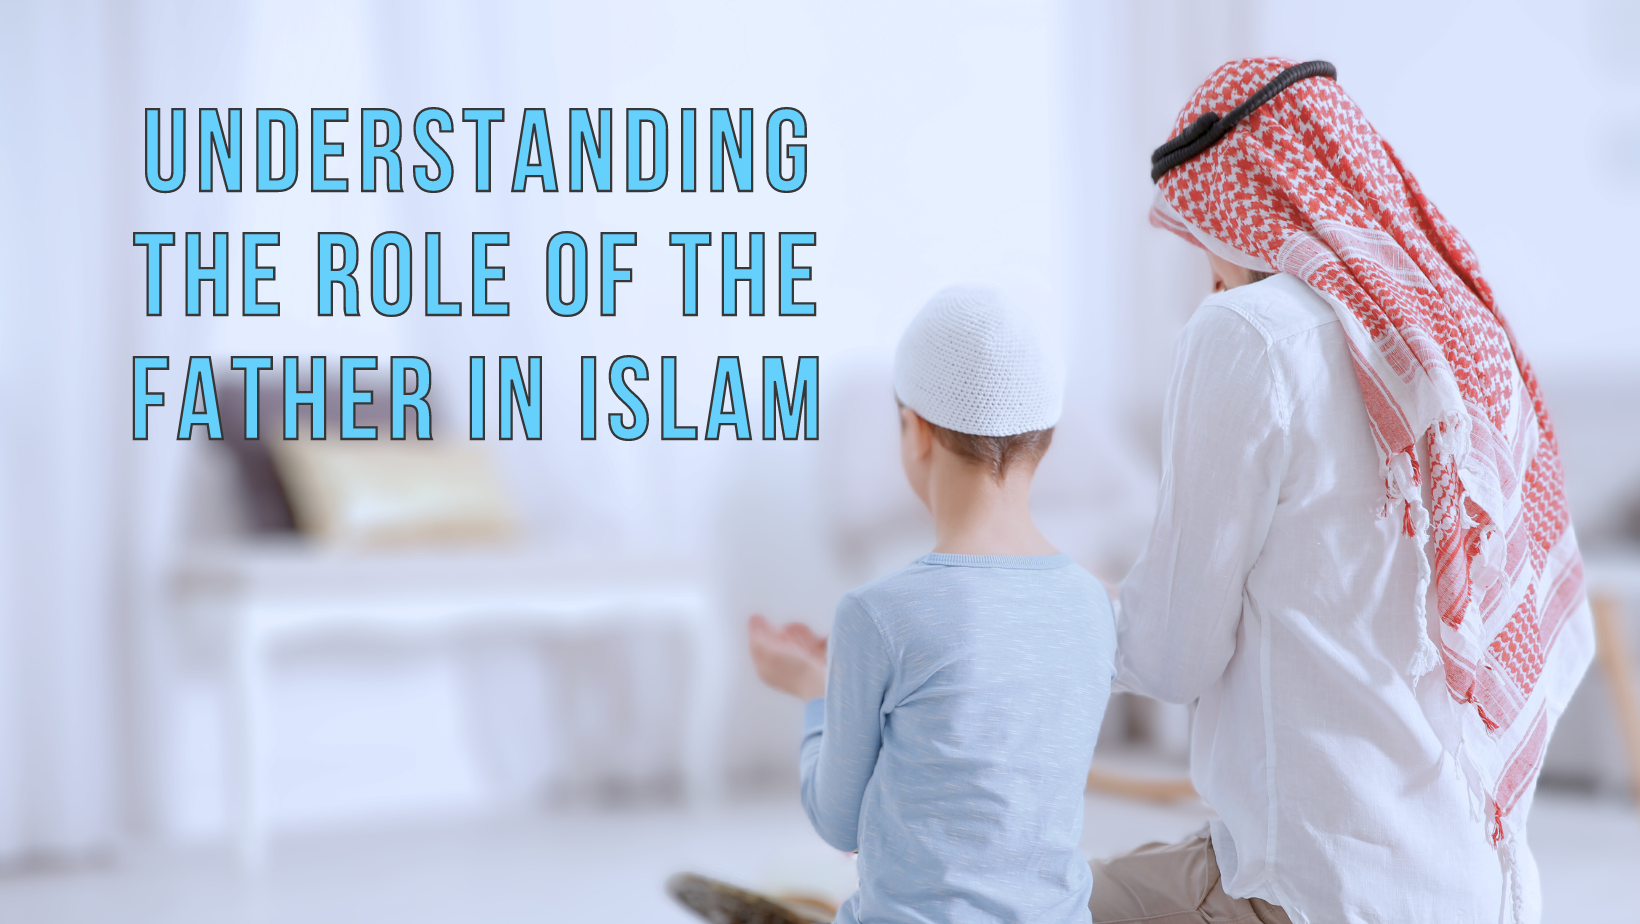 Understanding the role of the father in Islam